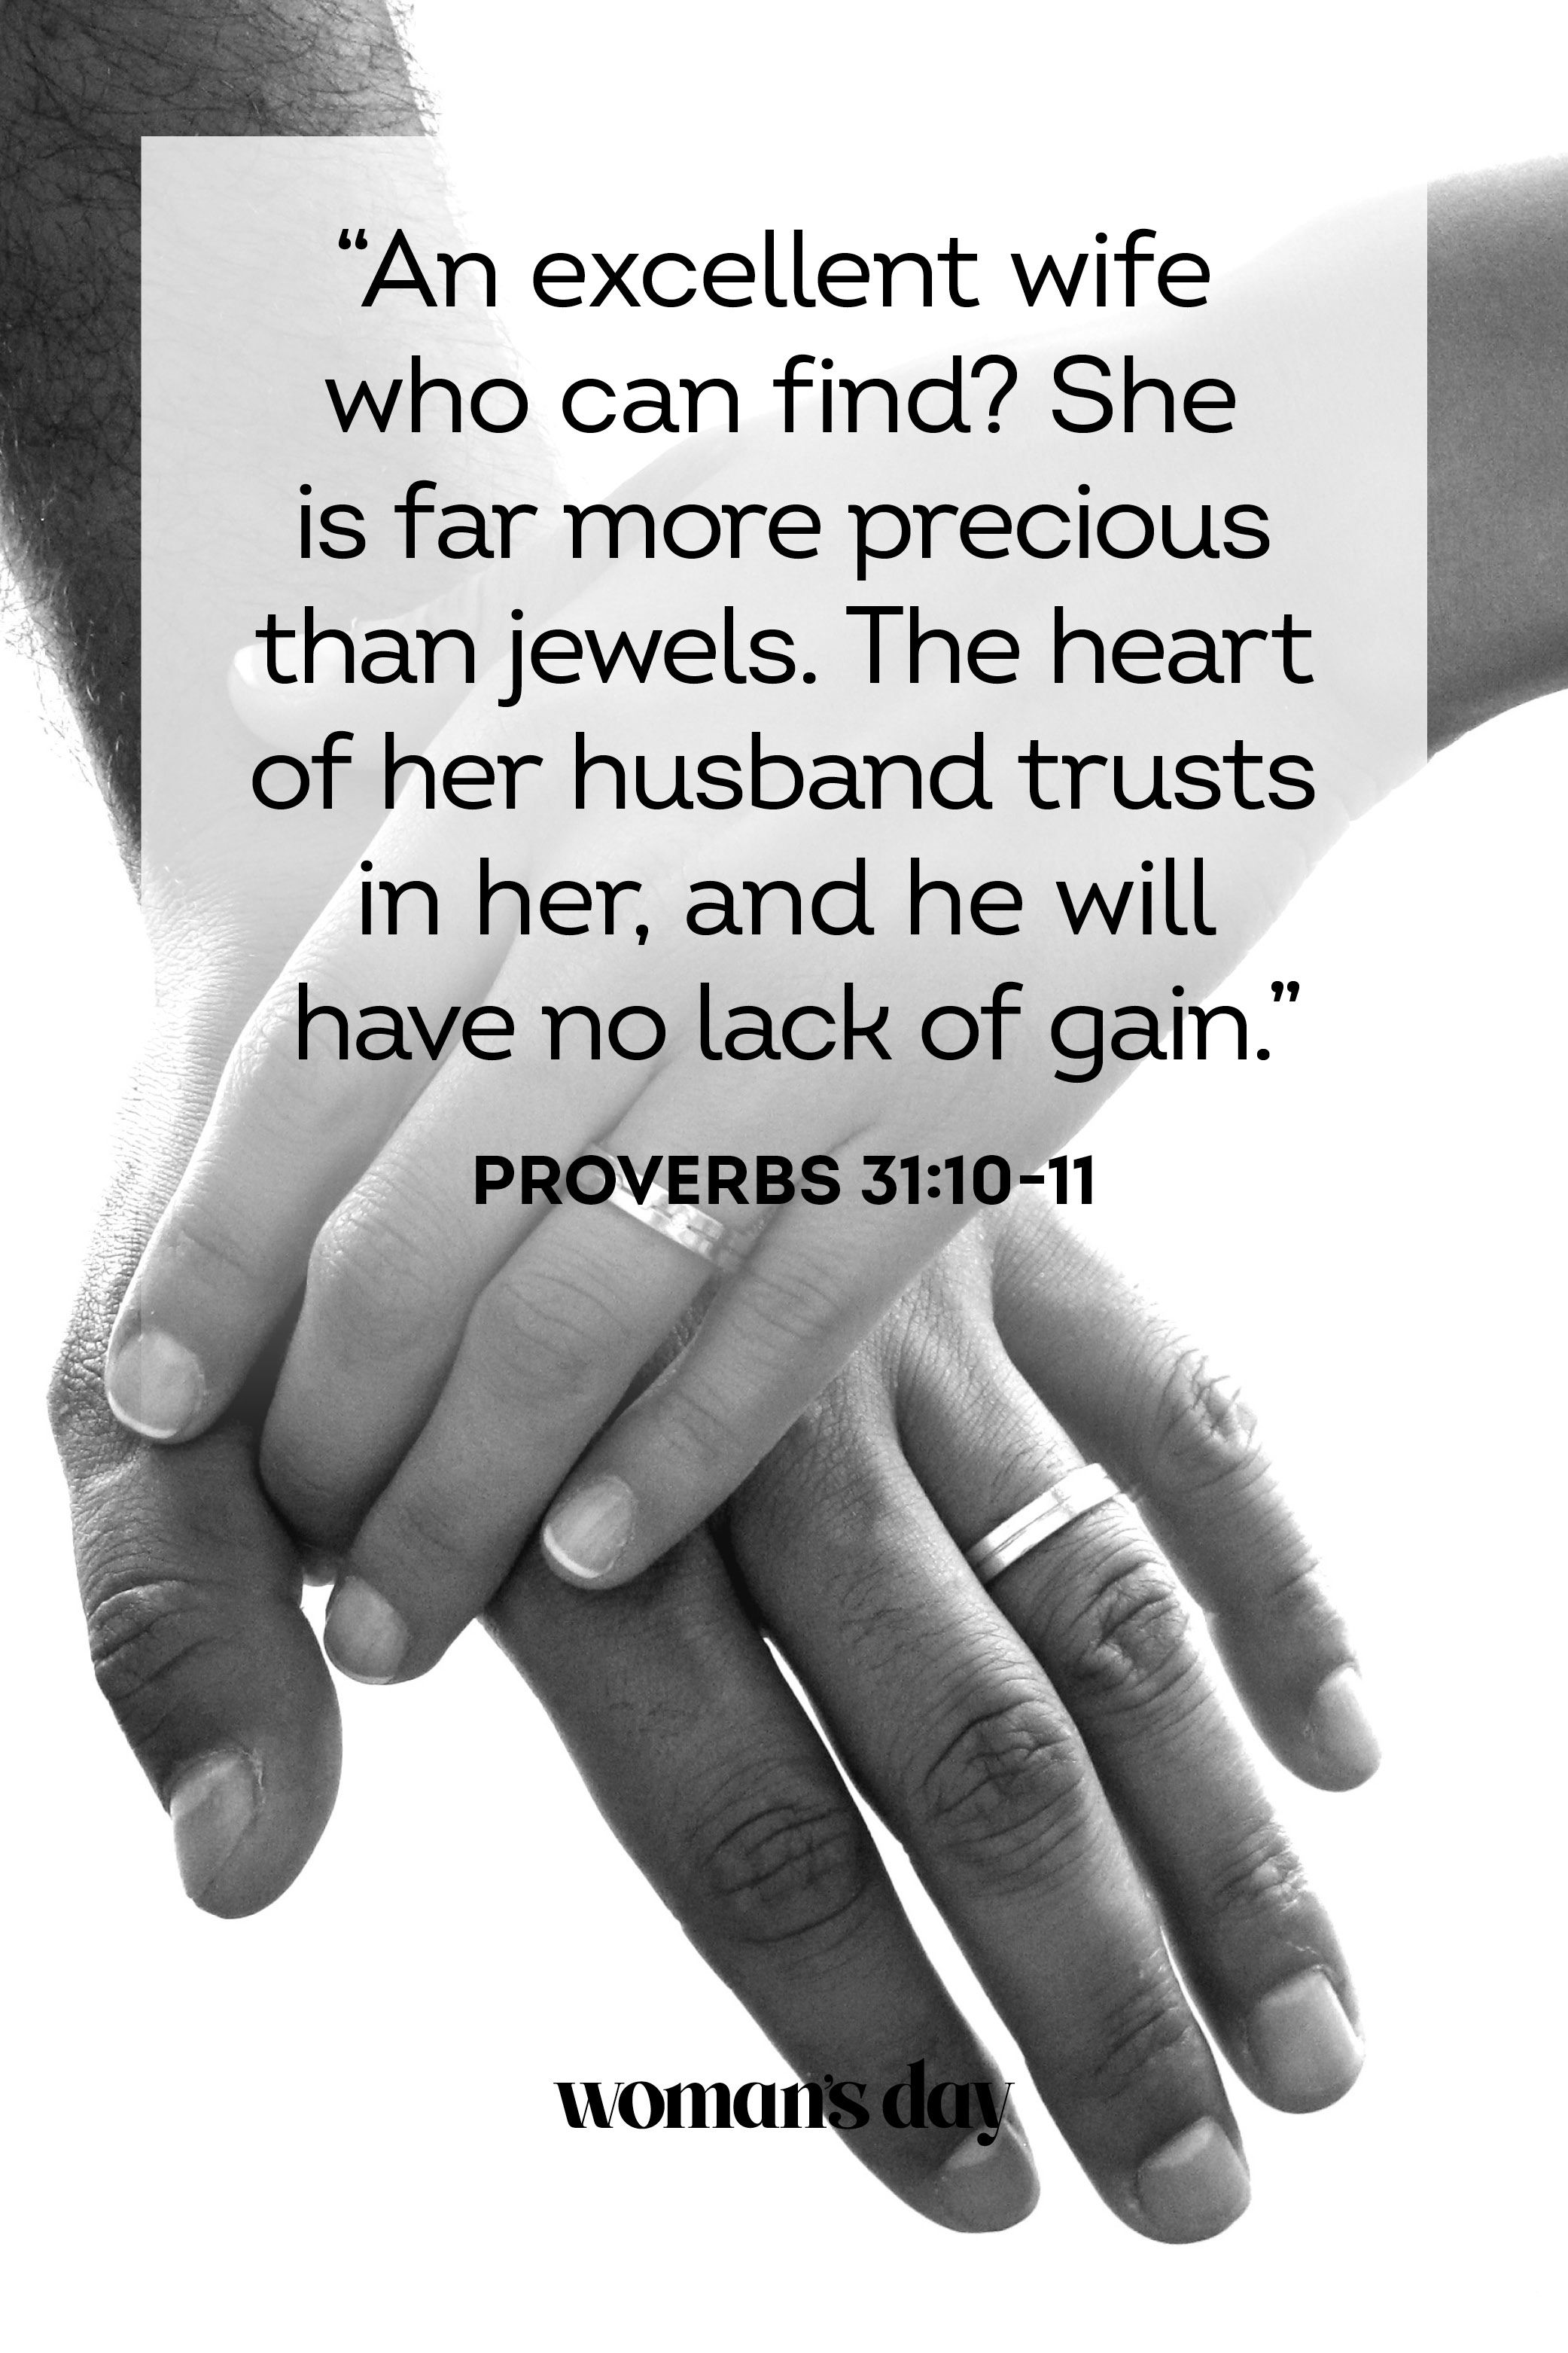 bible verses about love relationships in proverbs